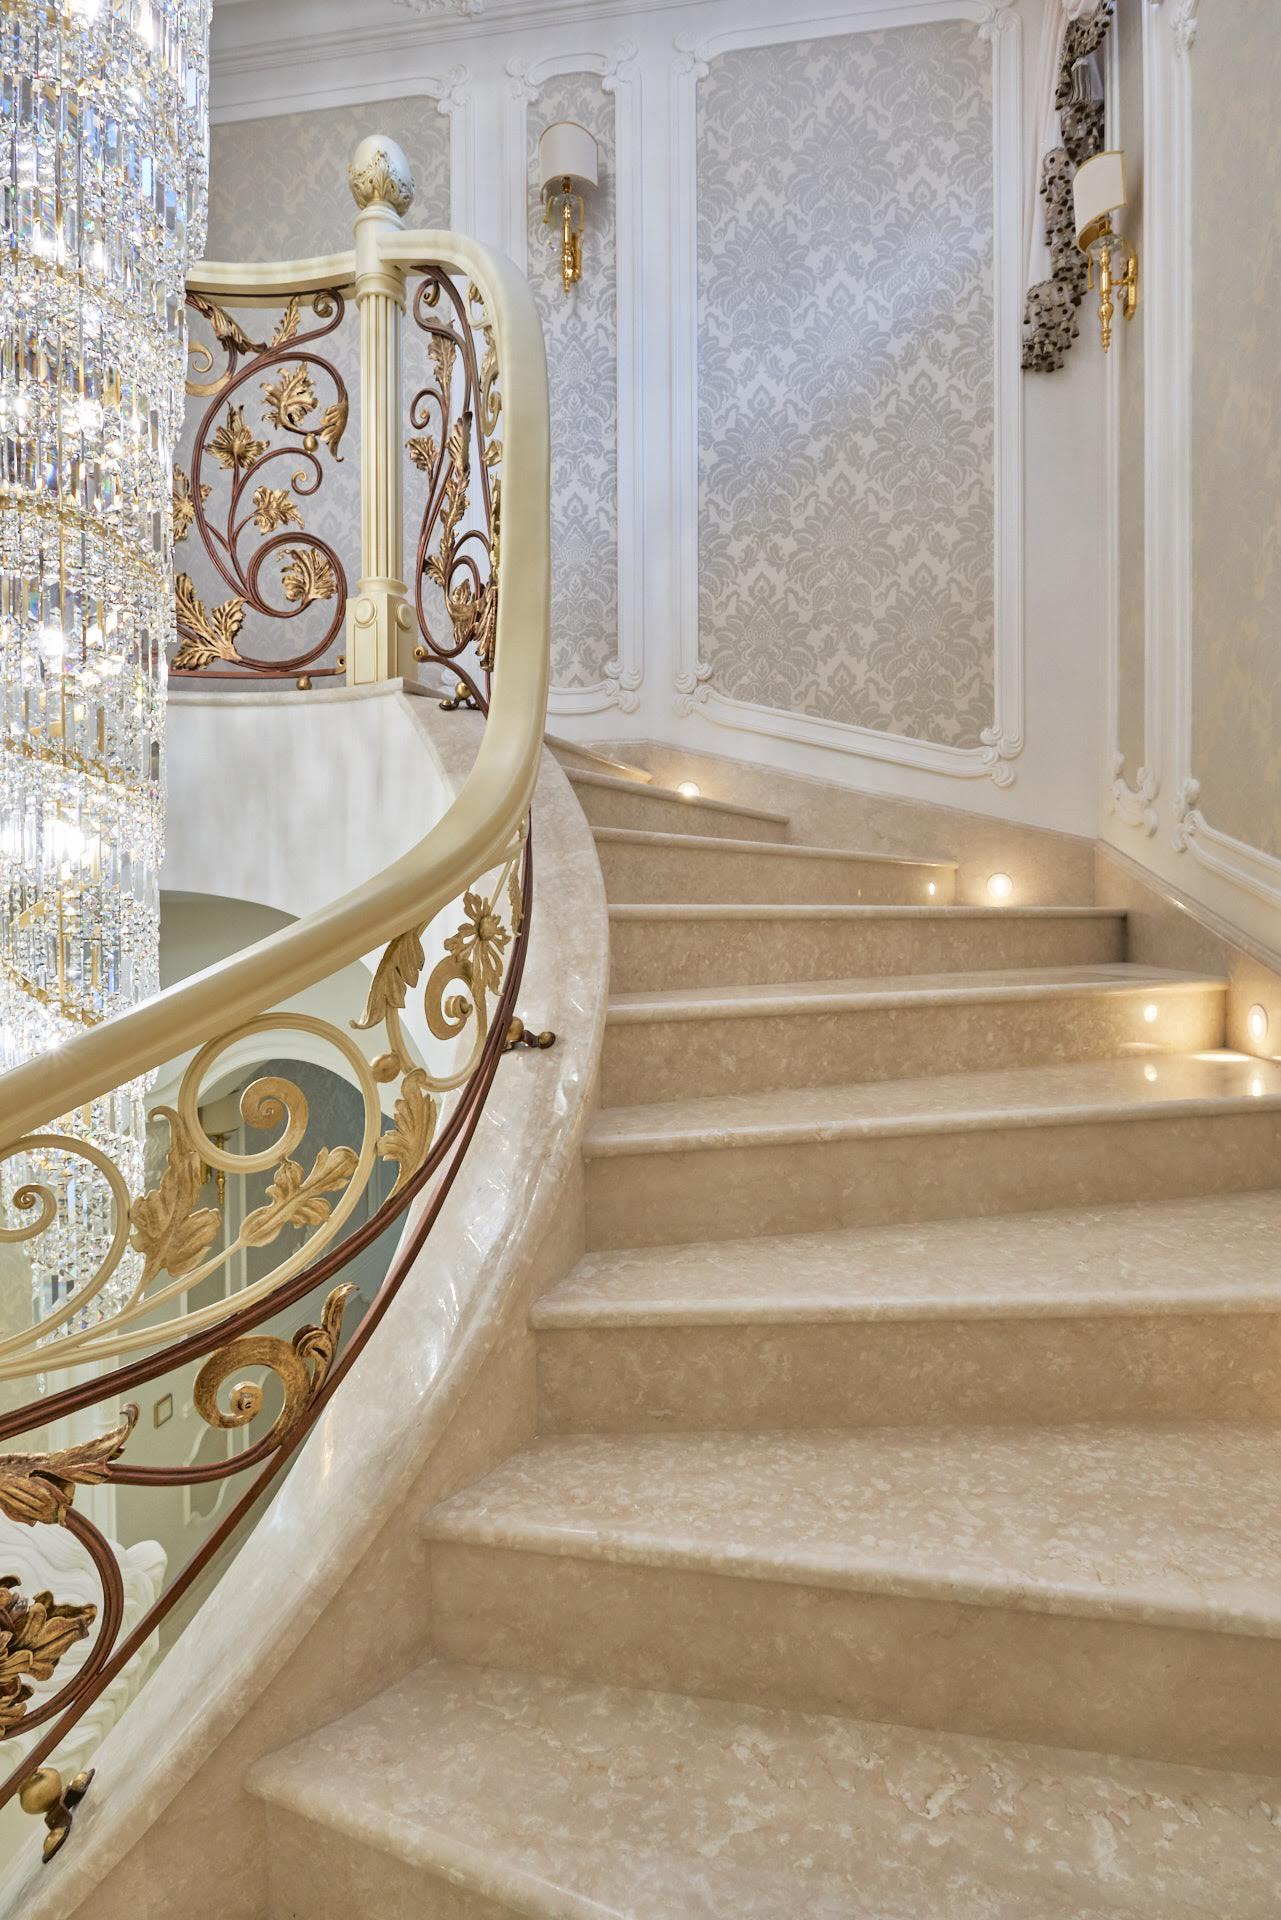 Staircase in a classic interior